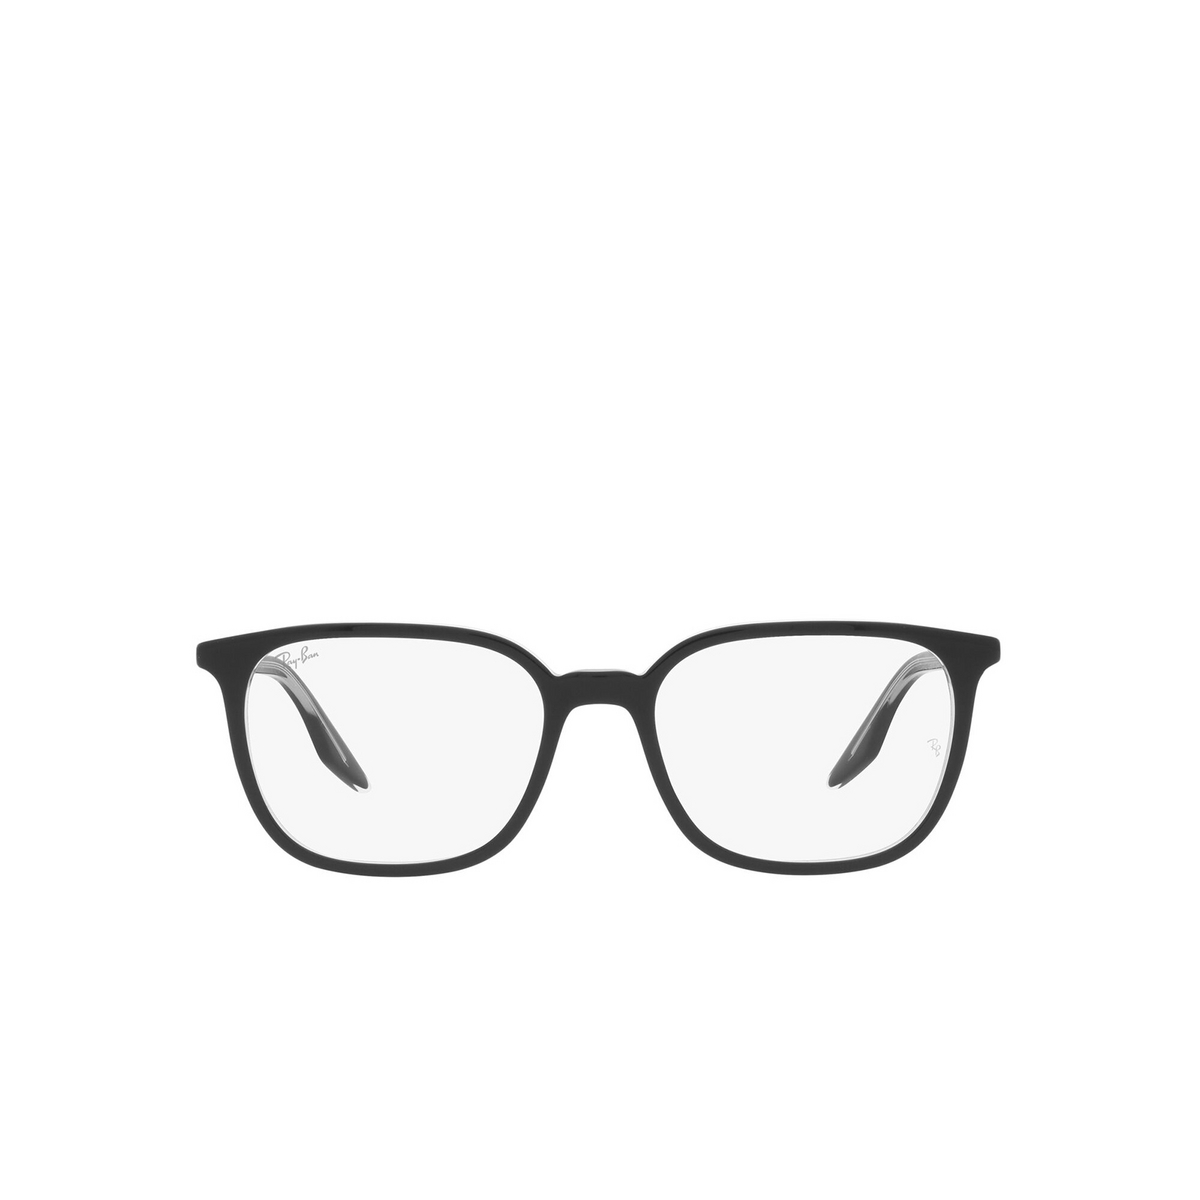 Ray-Ban® Square Eyeglasses: RX5406 color Black On Transparent 2034 - front view.